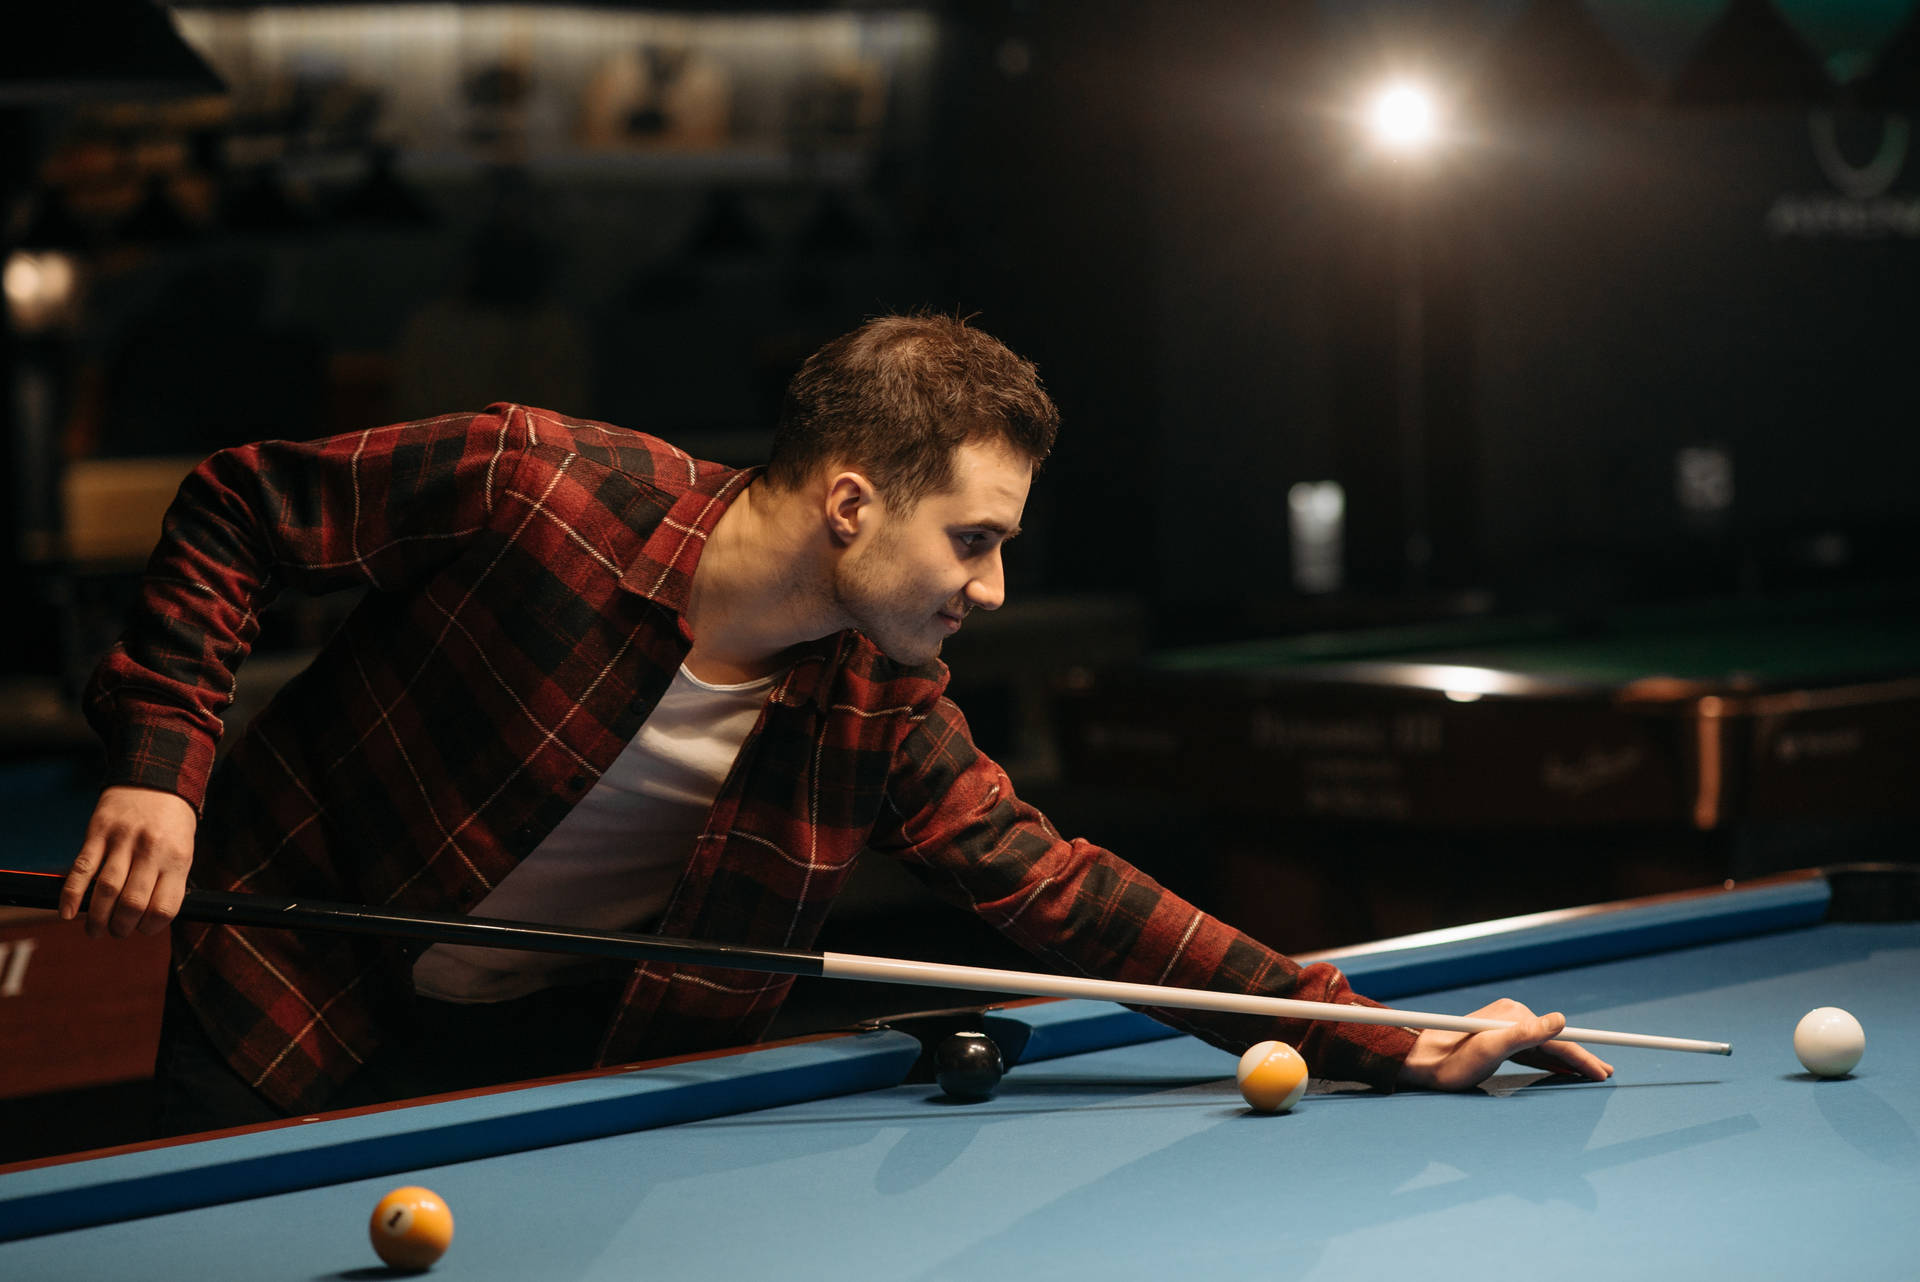 Billiards Man Playing On Table Wallpaper